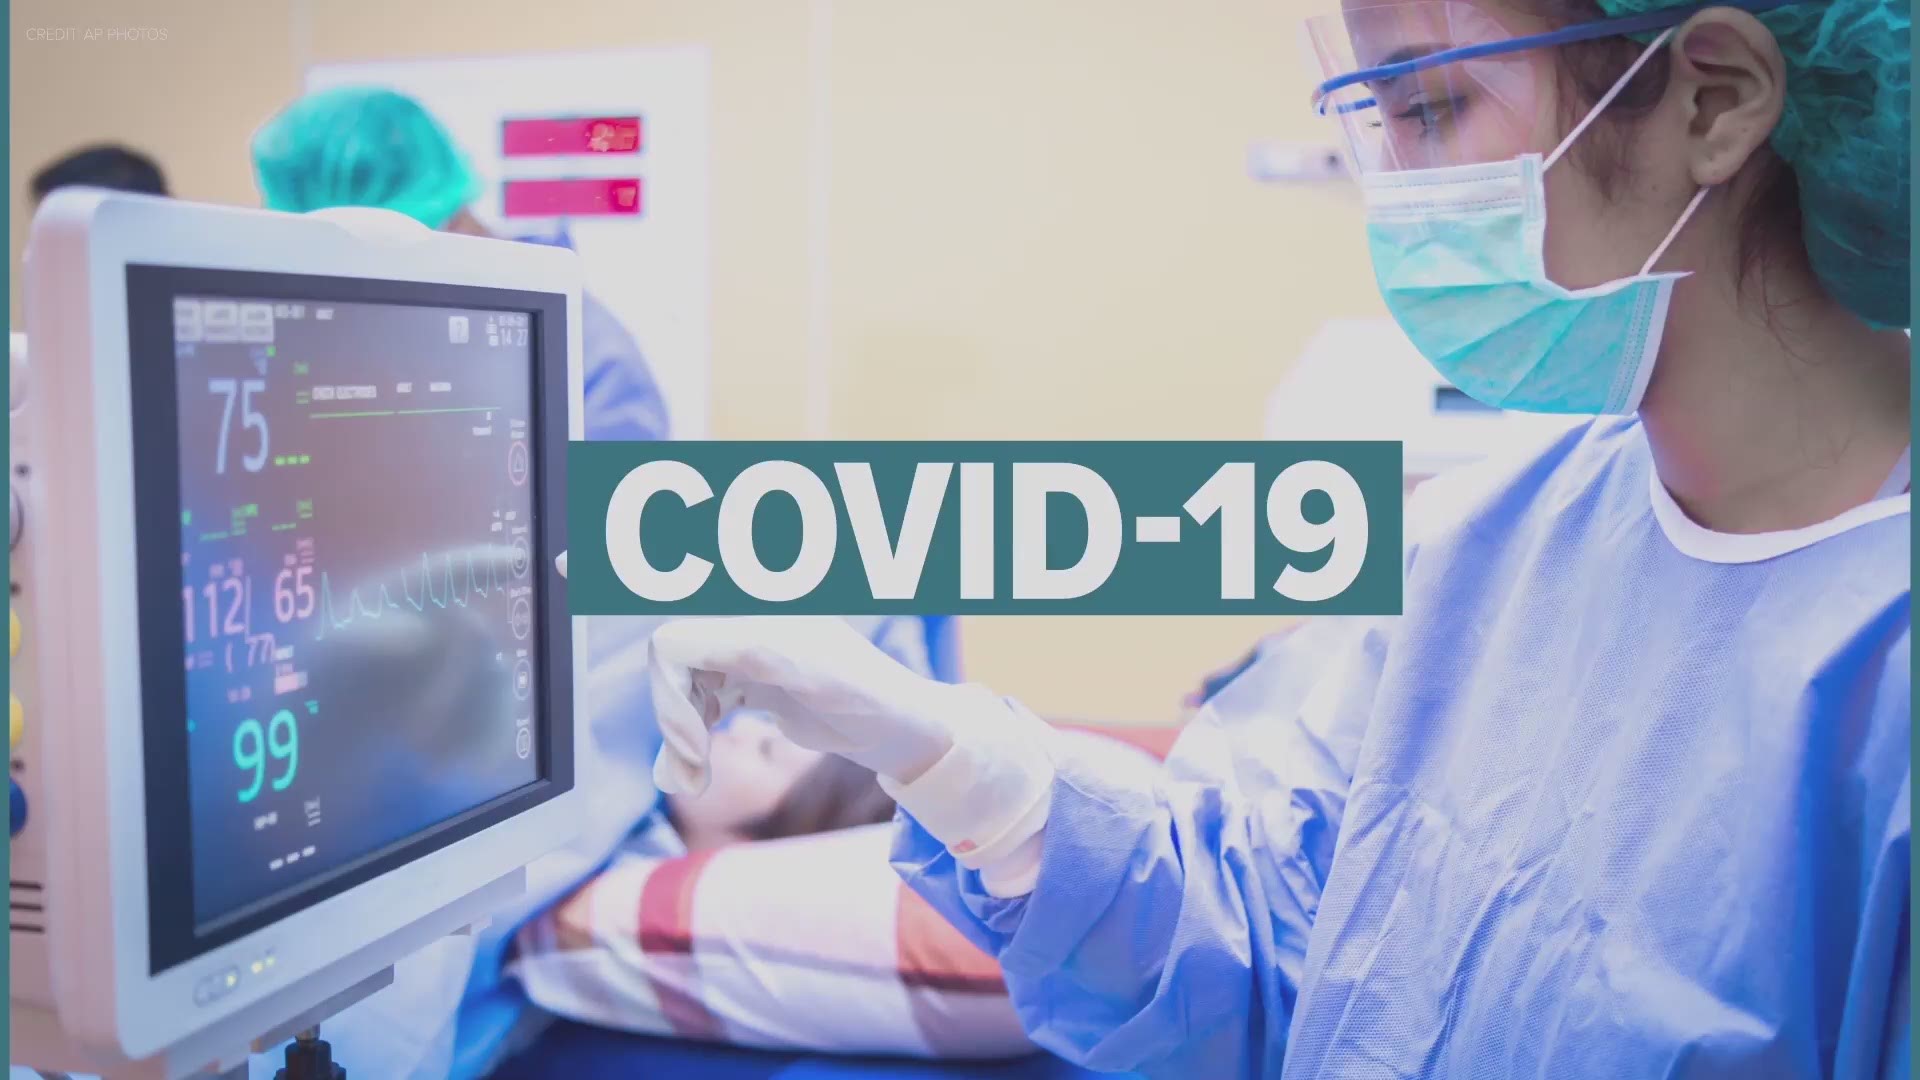 The number of coronavirus cases in Arizona has reached 7,648 as of Thursday, with 320 coronavirus-related deaths. Here's the latest COVID-19 update.